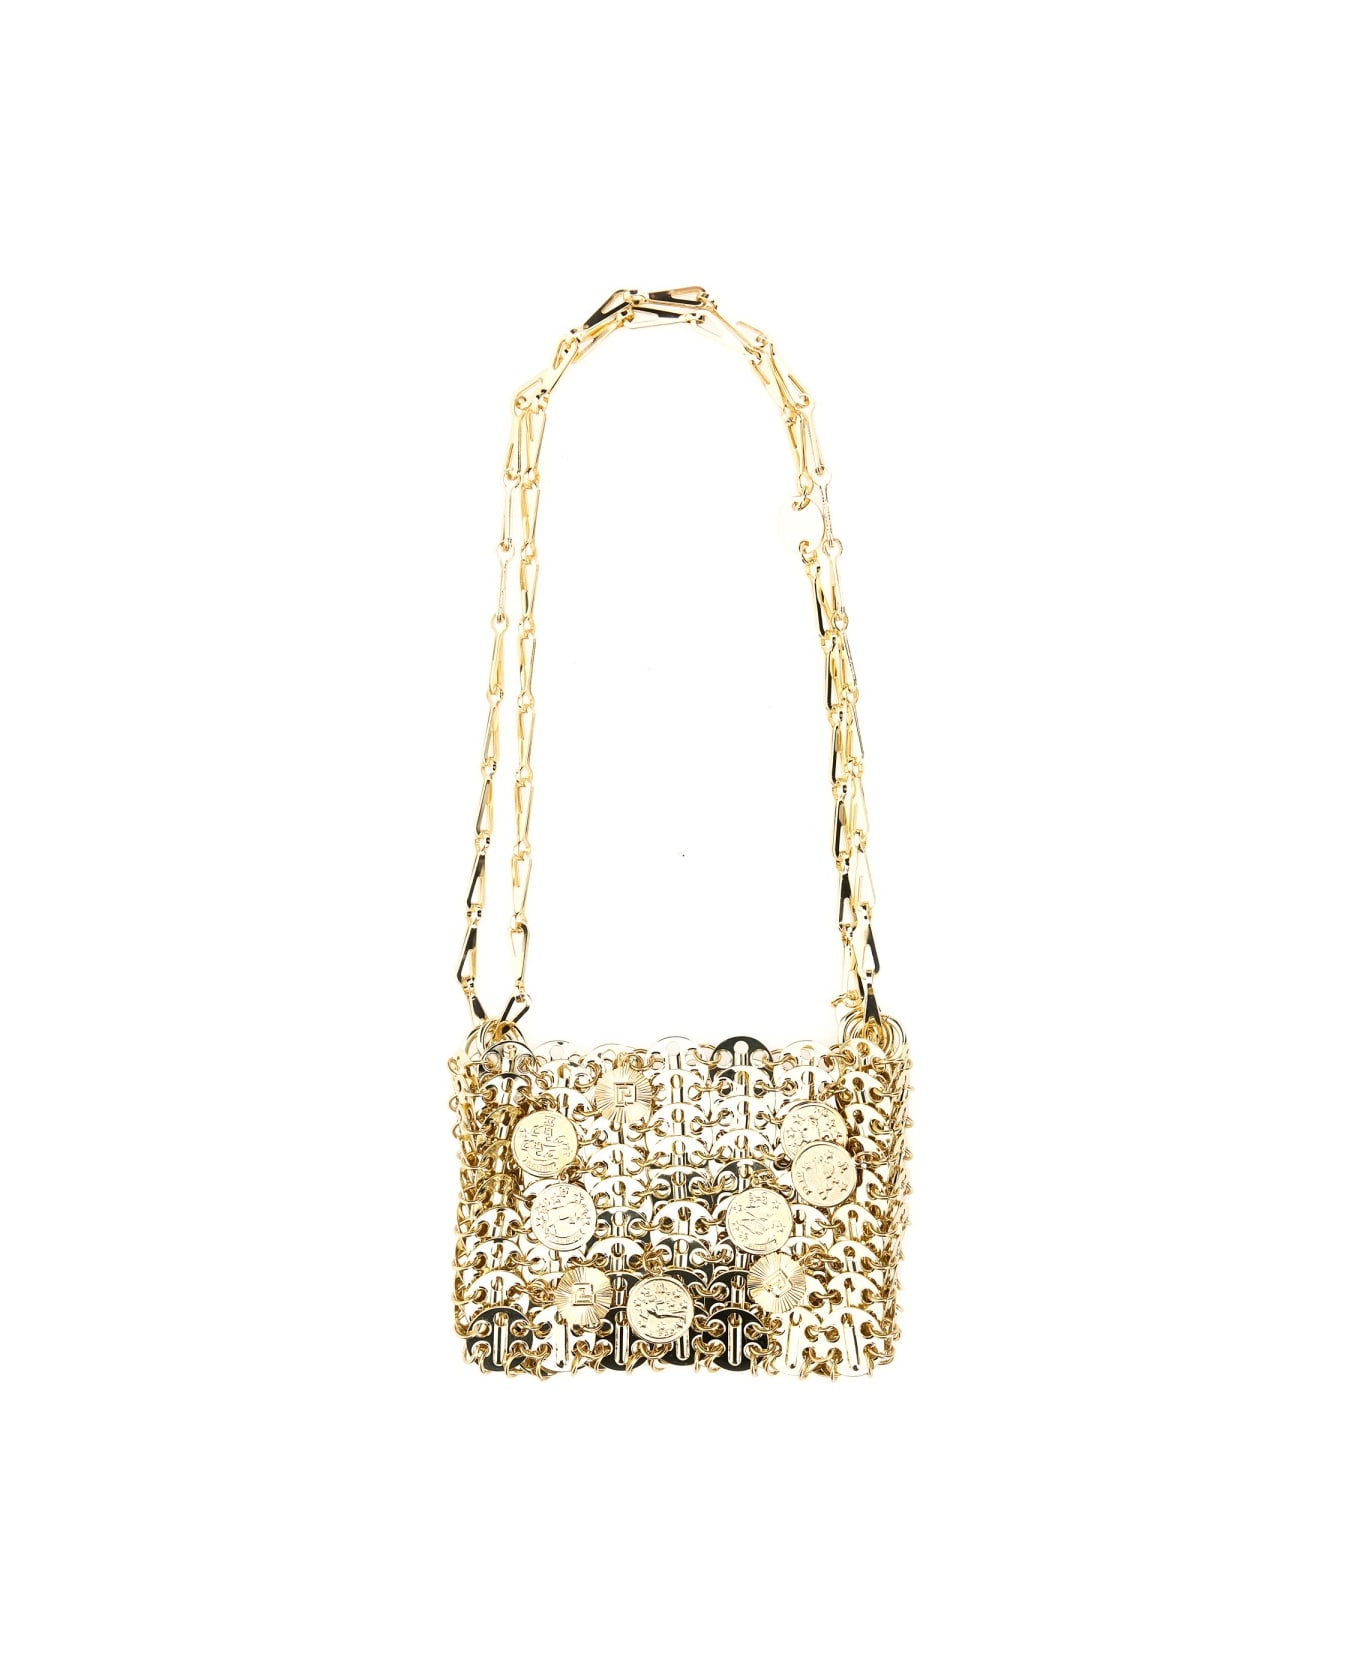 Paco Rabanne 1969 Dwarf Bag With Medals - GOLD